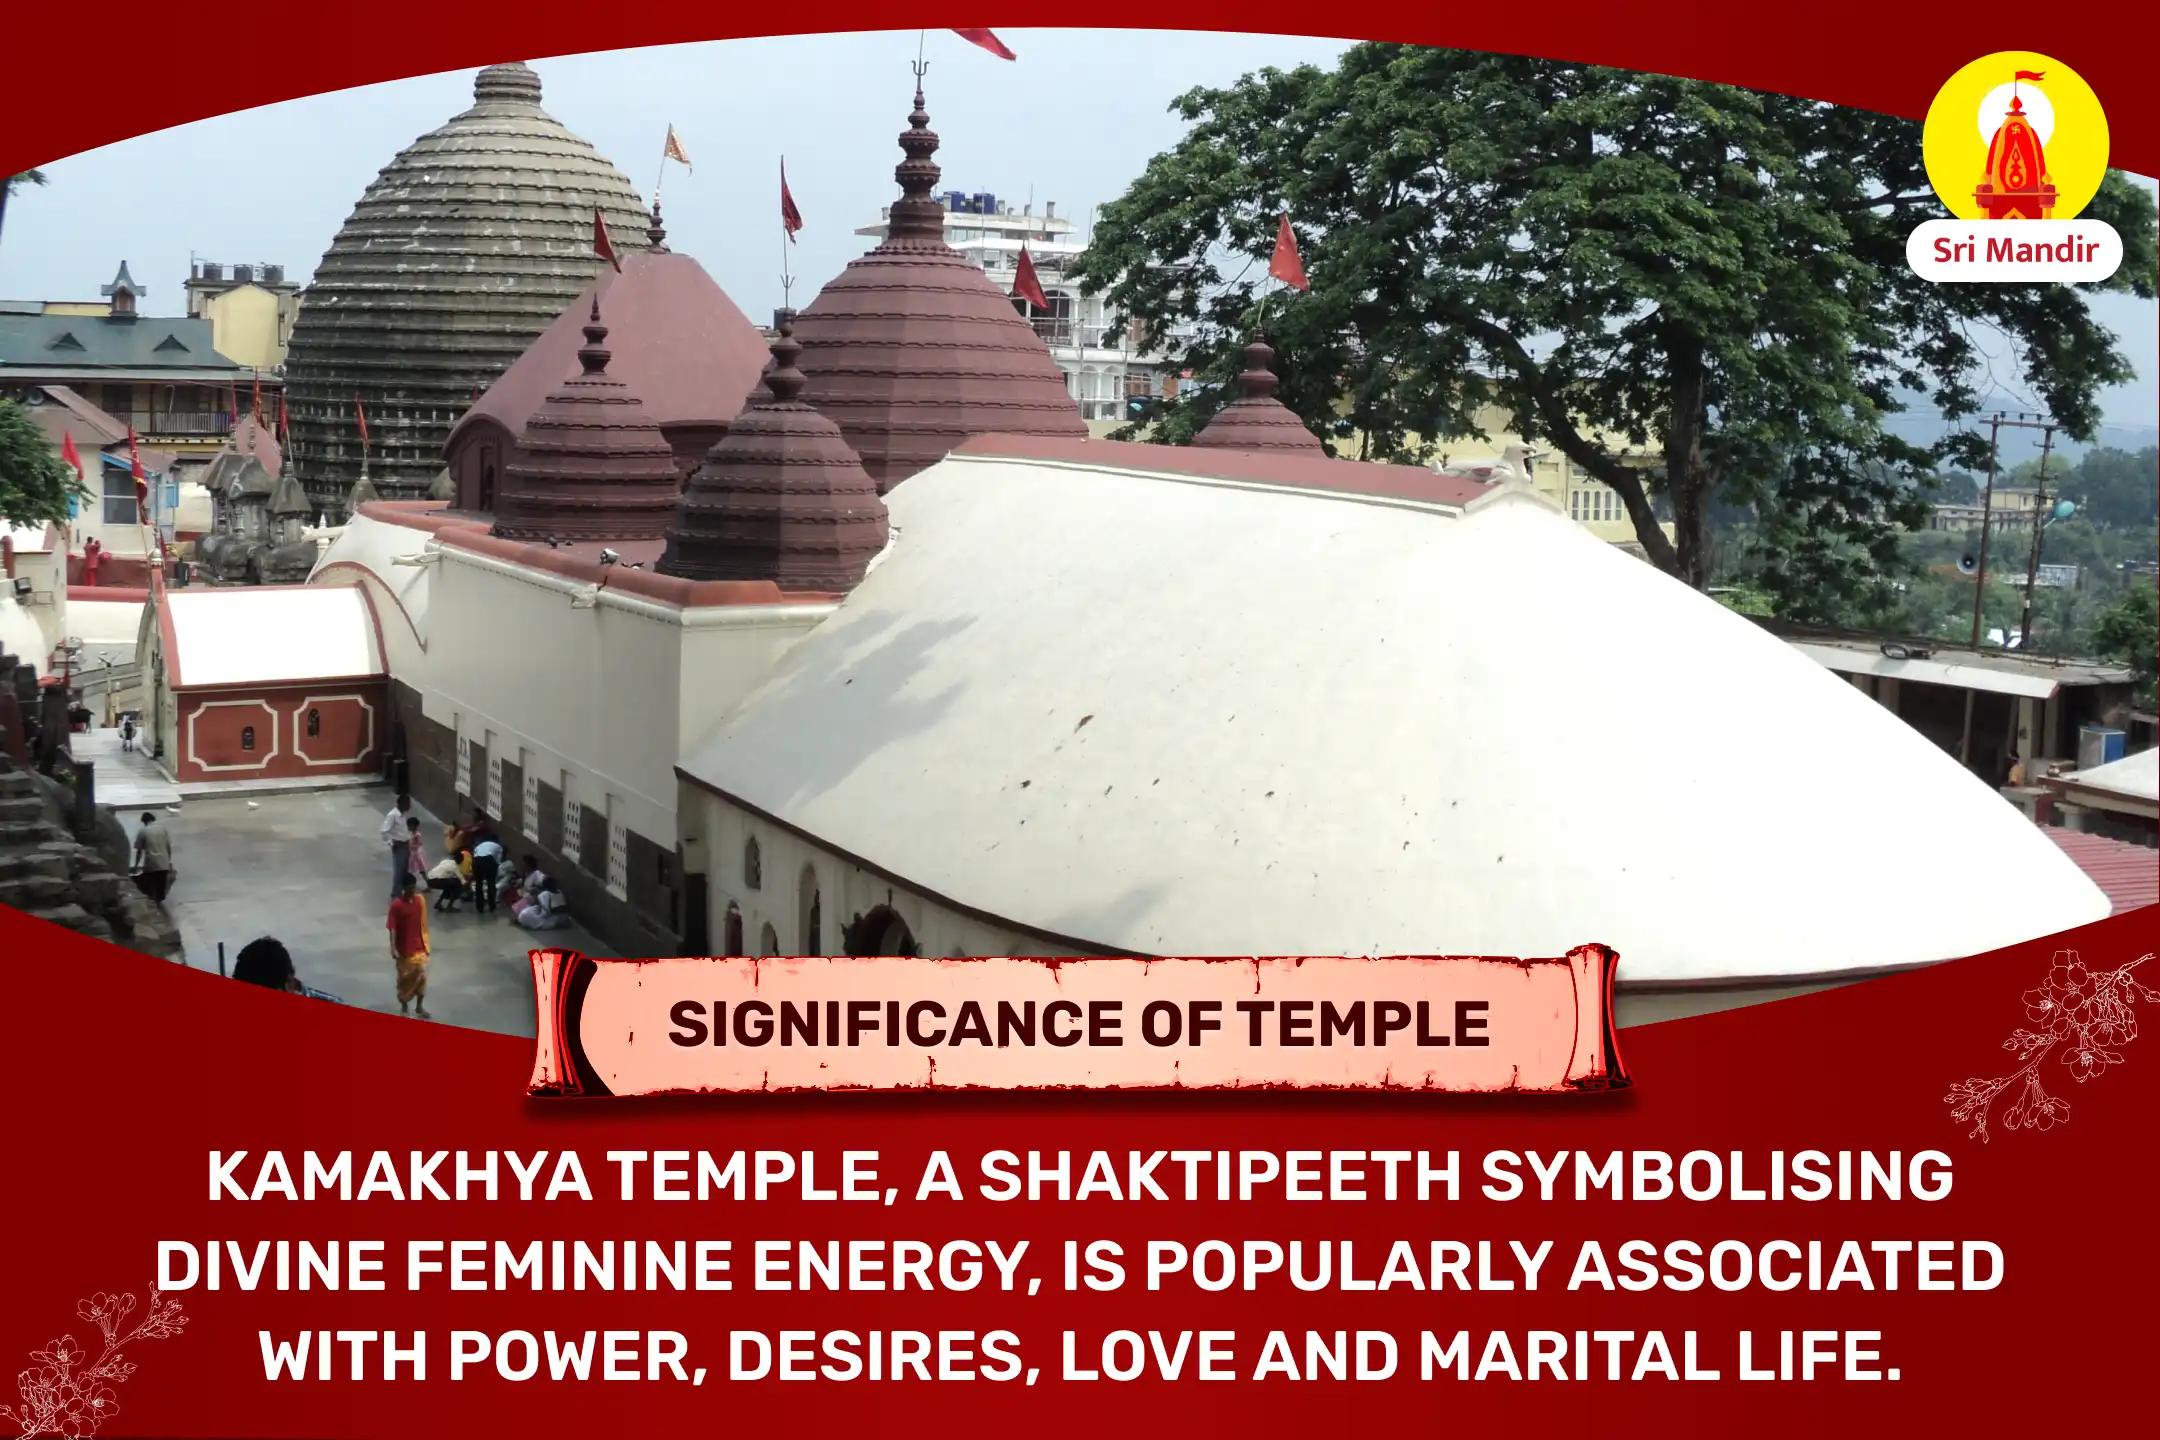 Maa Kamakhya Tantrokta Maha Yagya To Achieve Bliss in Relationship and Resolve Conflicts